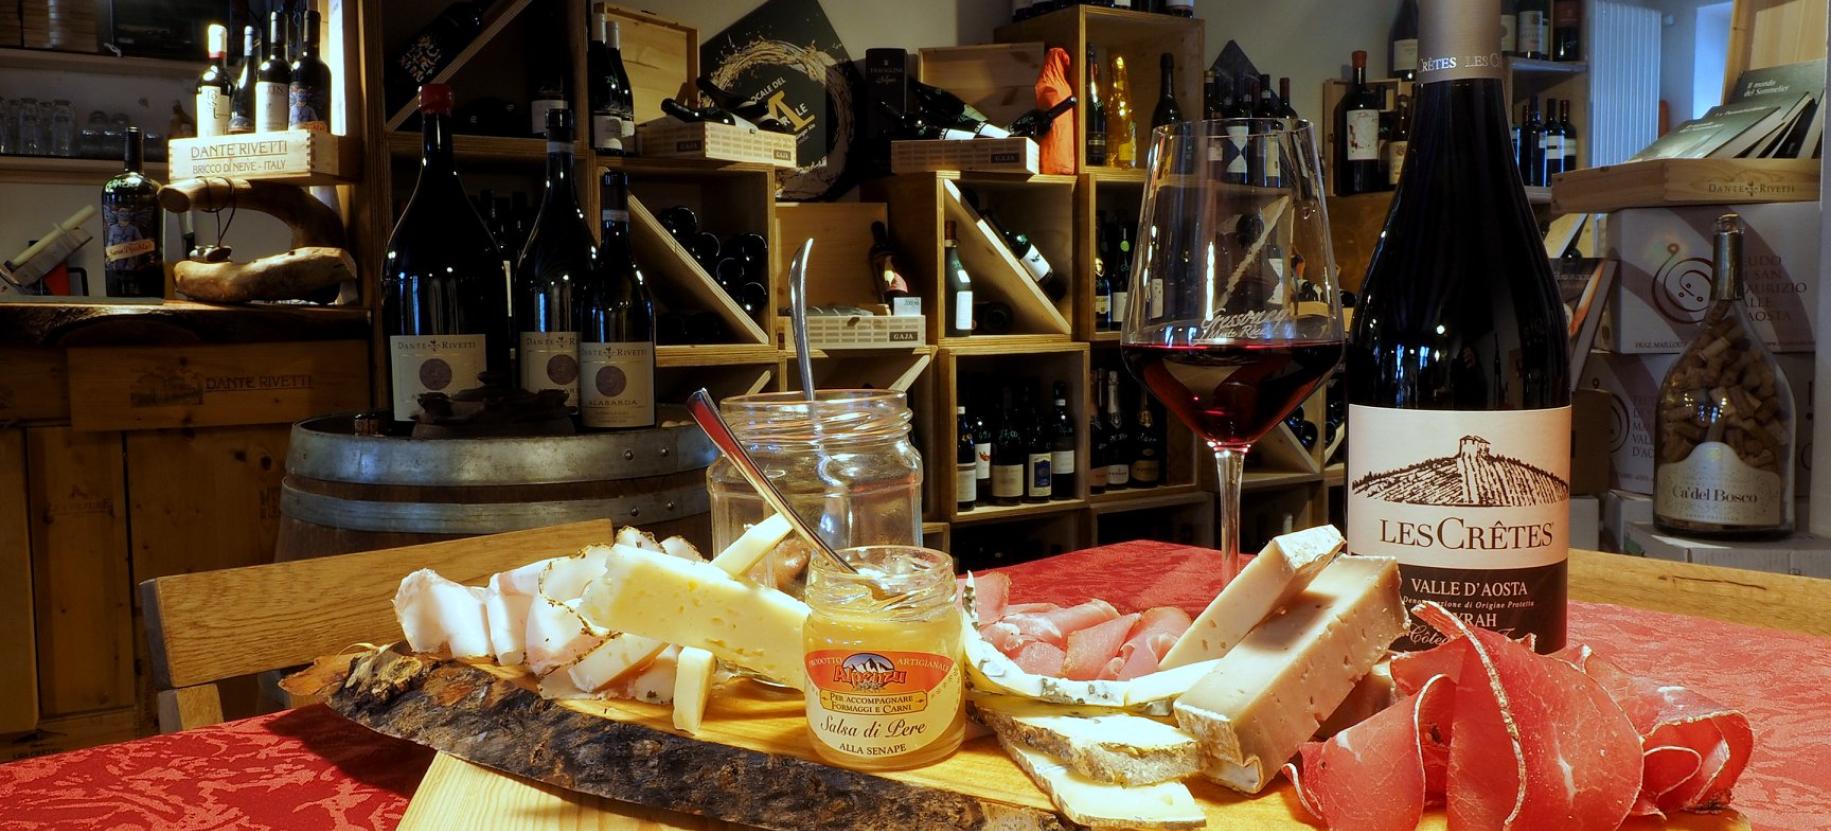 Castore & Polluce - Charcuterie and cheese board